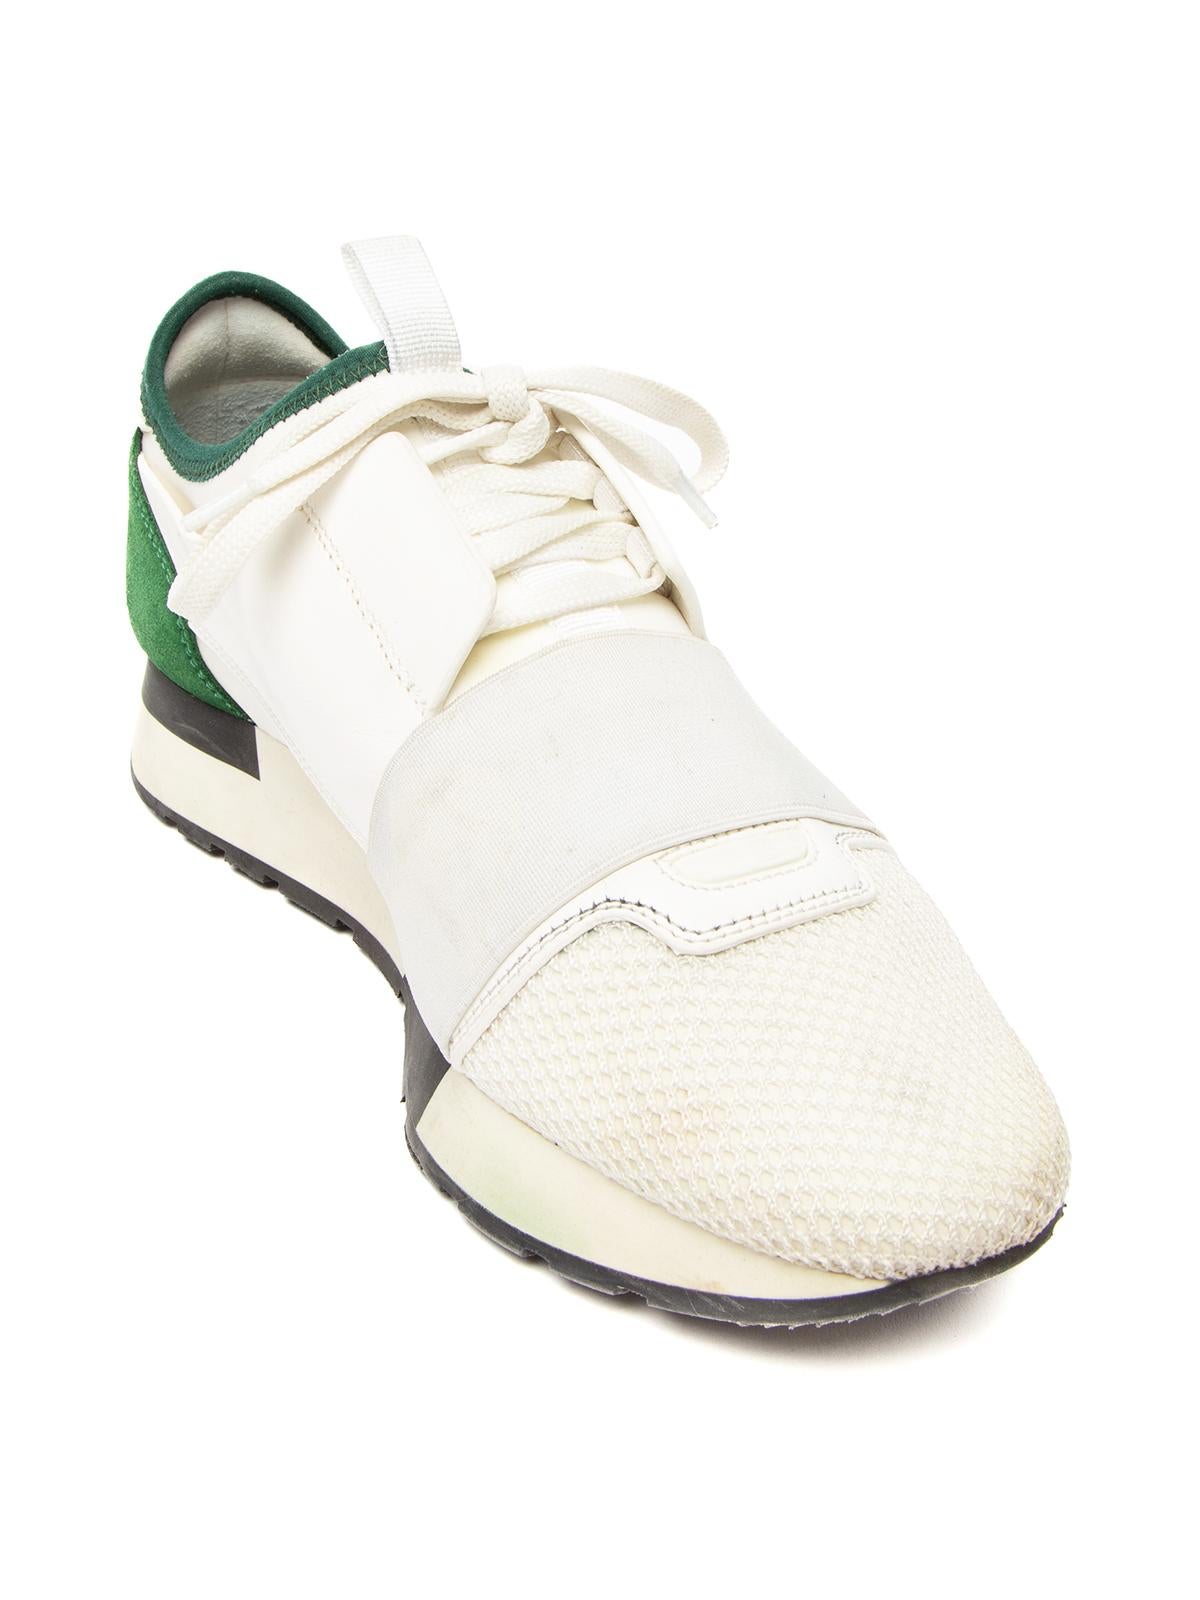 CONDITION is Good. General wear to sneakers is evident. Moderate signs of wear to midsole and toes, with some fabric discolouration on this used Balenciaga designer resale item. Details Colour - white Material - multiple Style- low top Toe style -